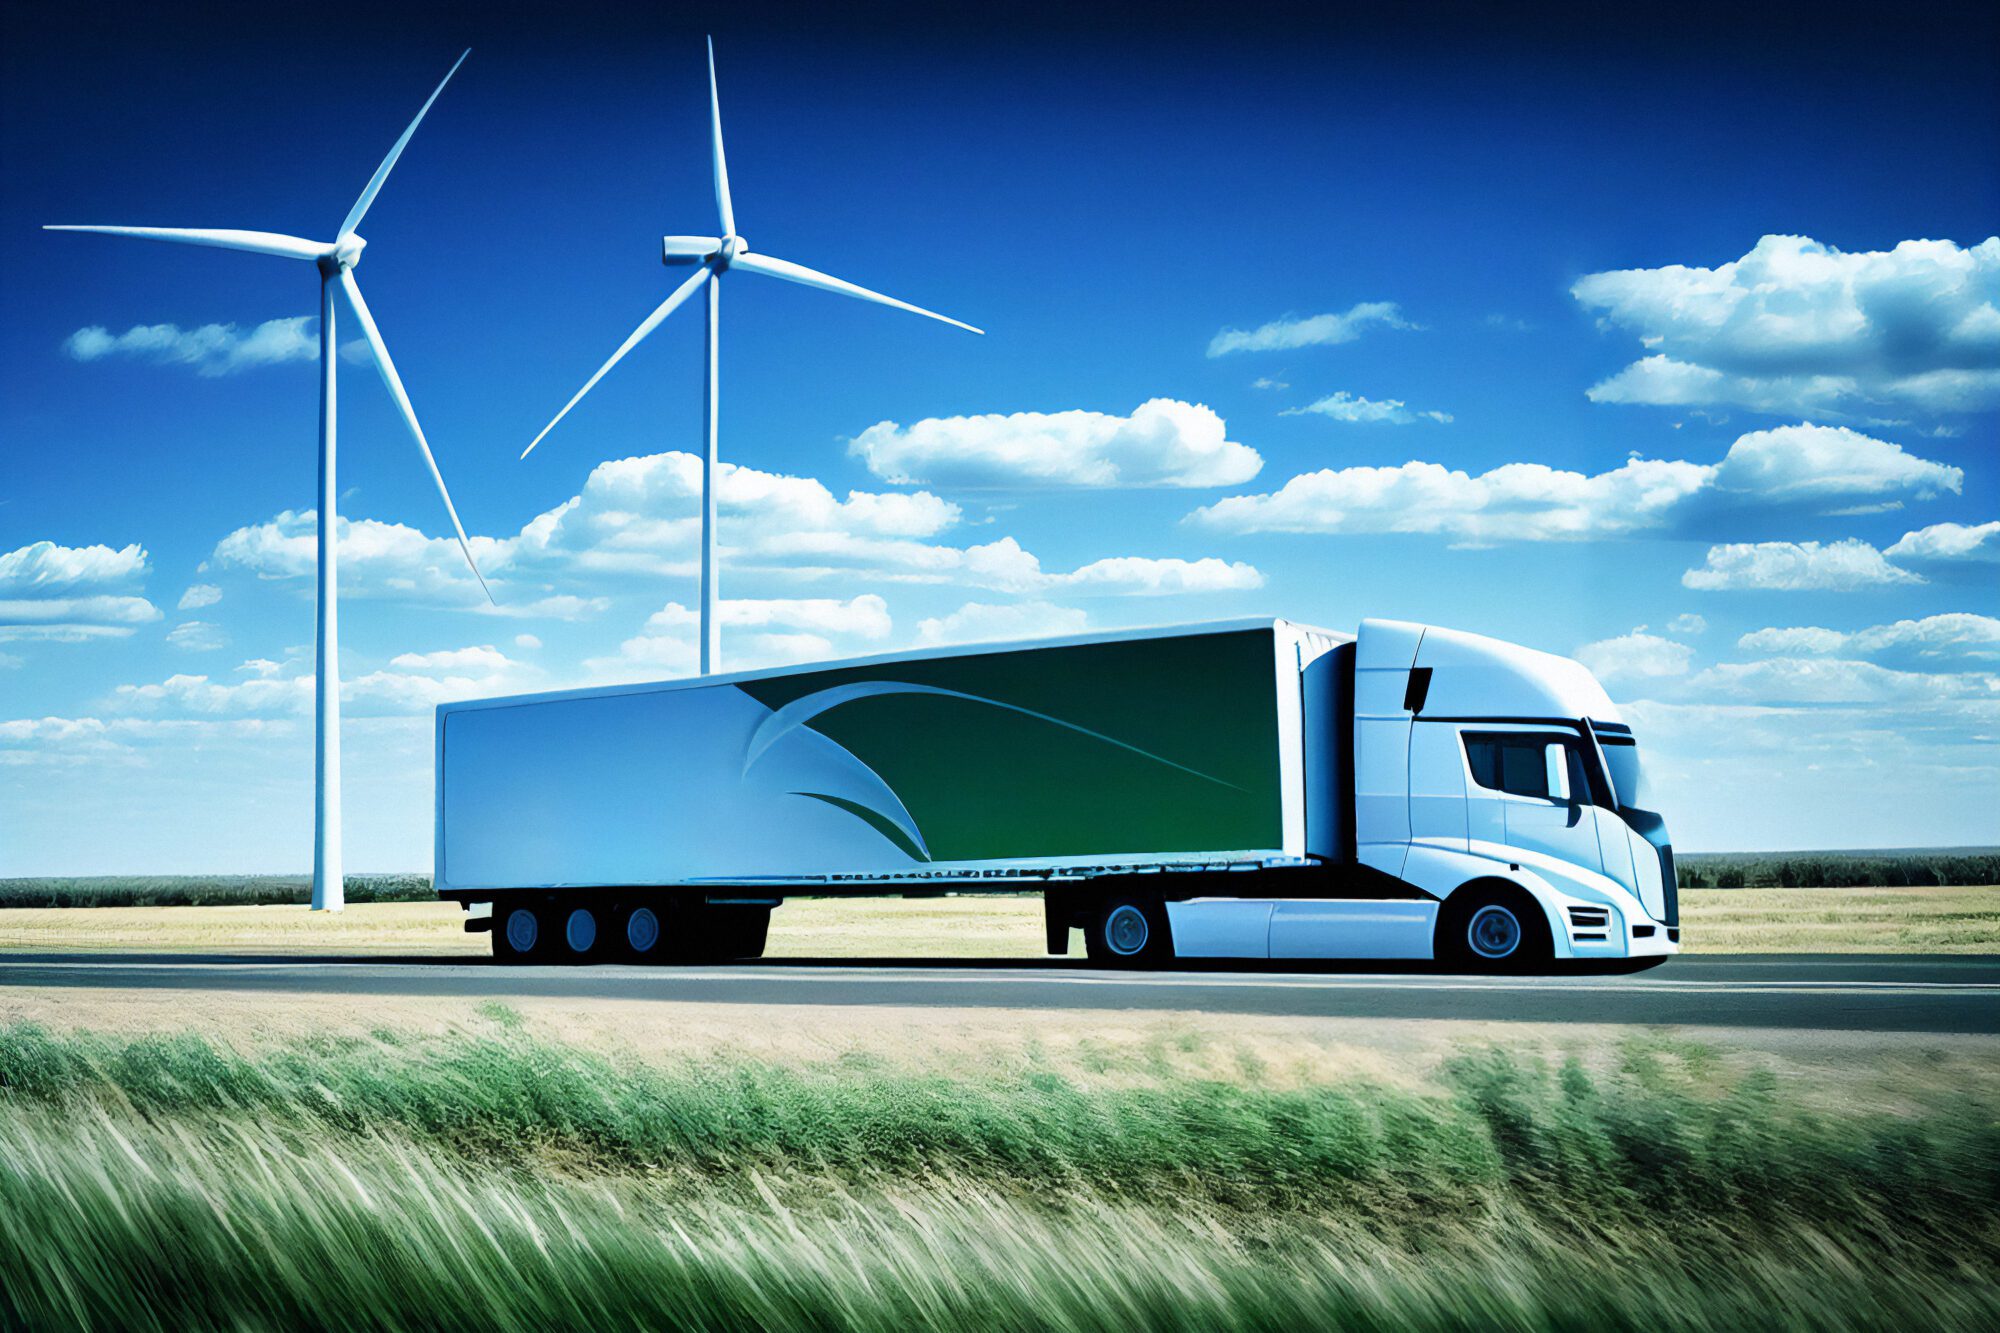 Deploy charging infrastructure in “no regrets” freight zones and corridors to keep U.S. commercial truck electrification aligned with climate goals – International Council on Clean Transportation